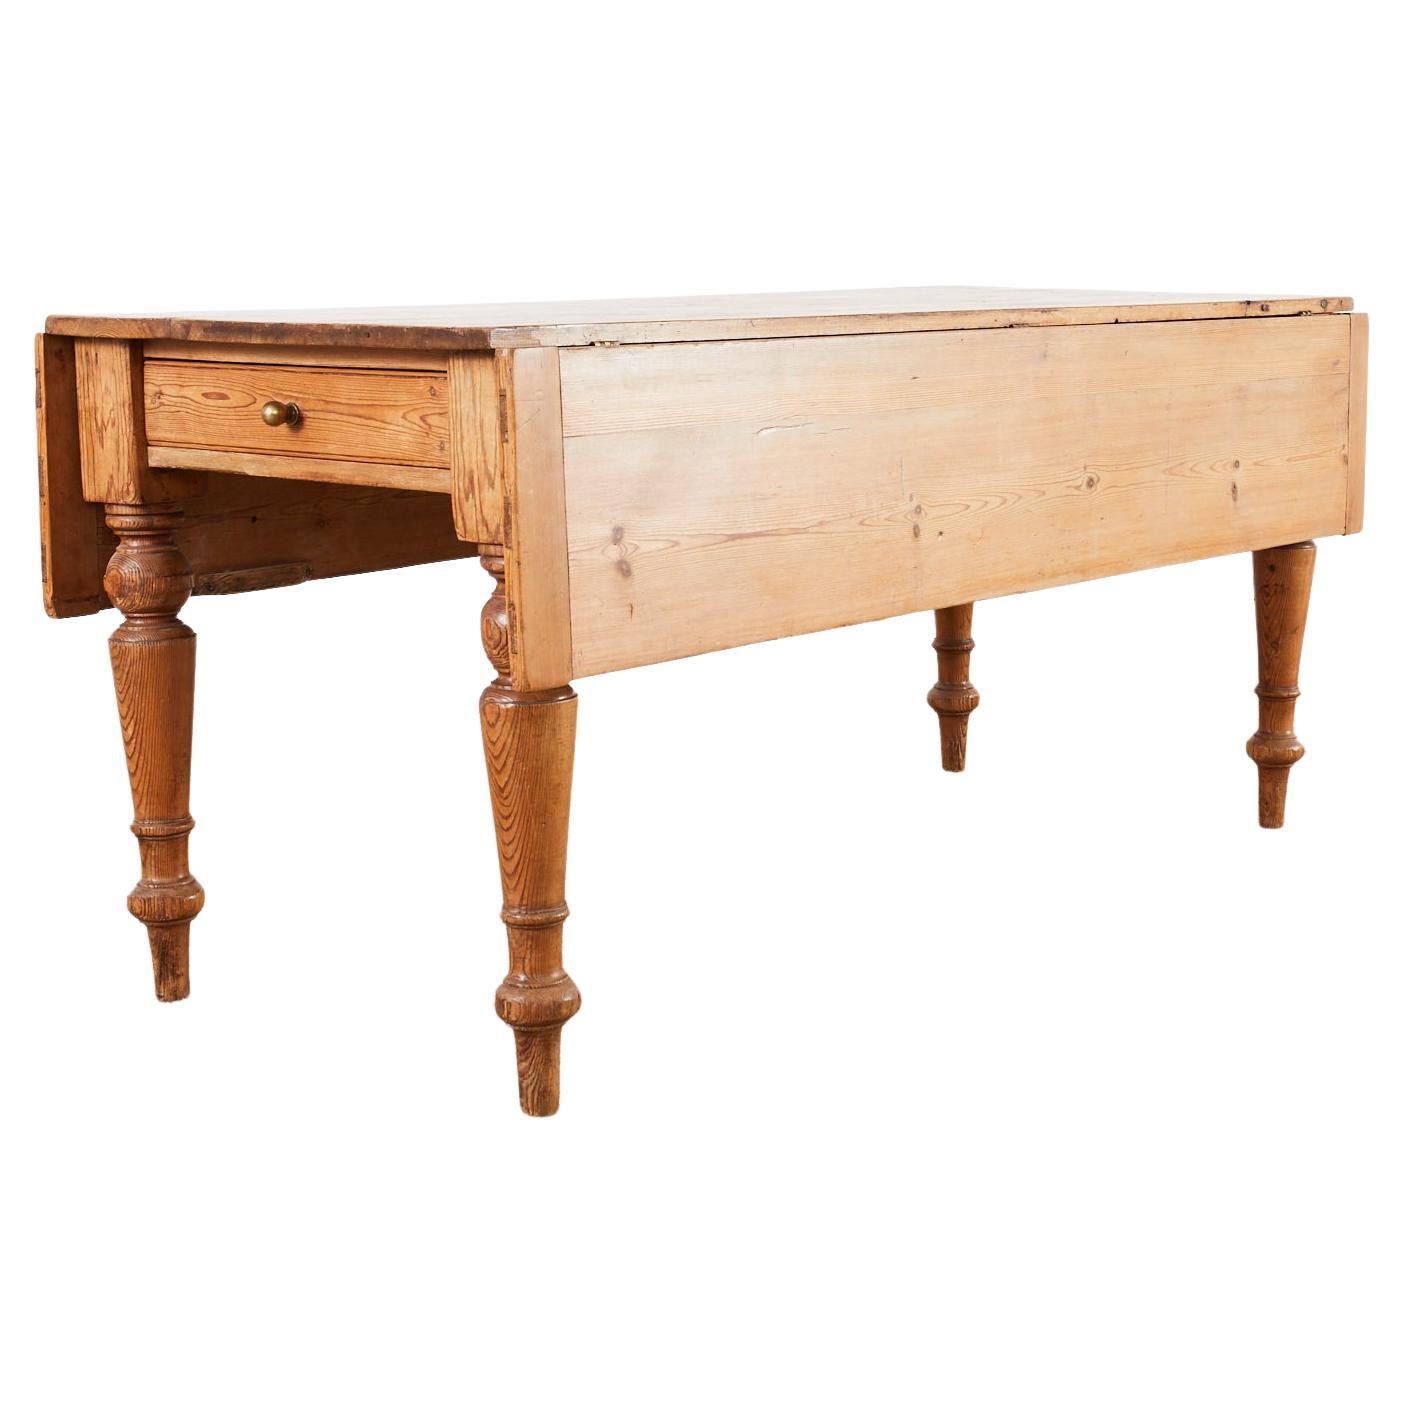 Country English Provincial Pine Farmhouse Drop Leaf Dining Table